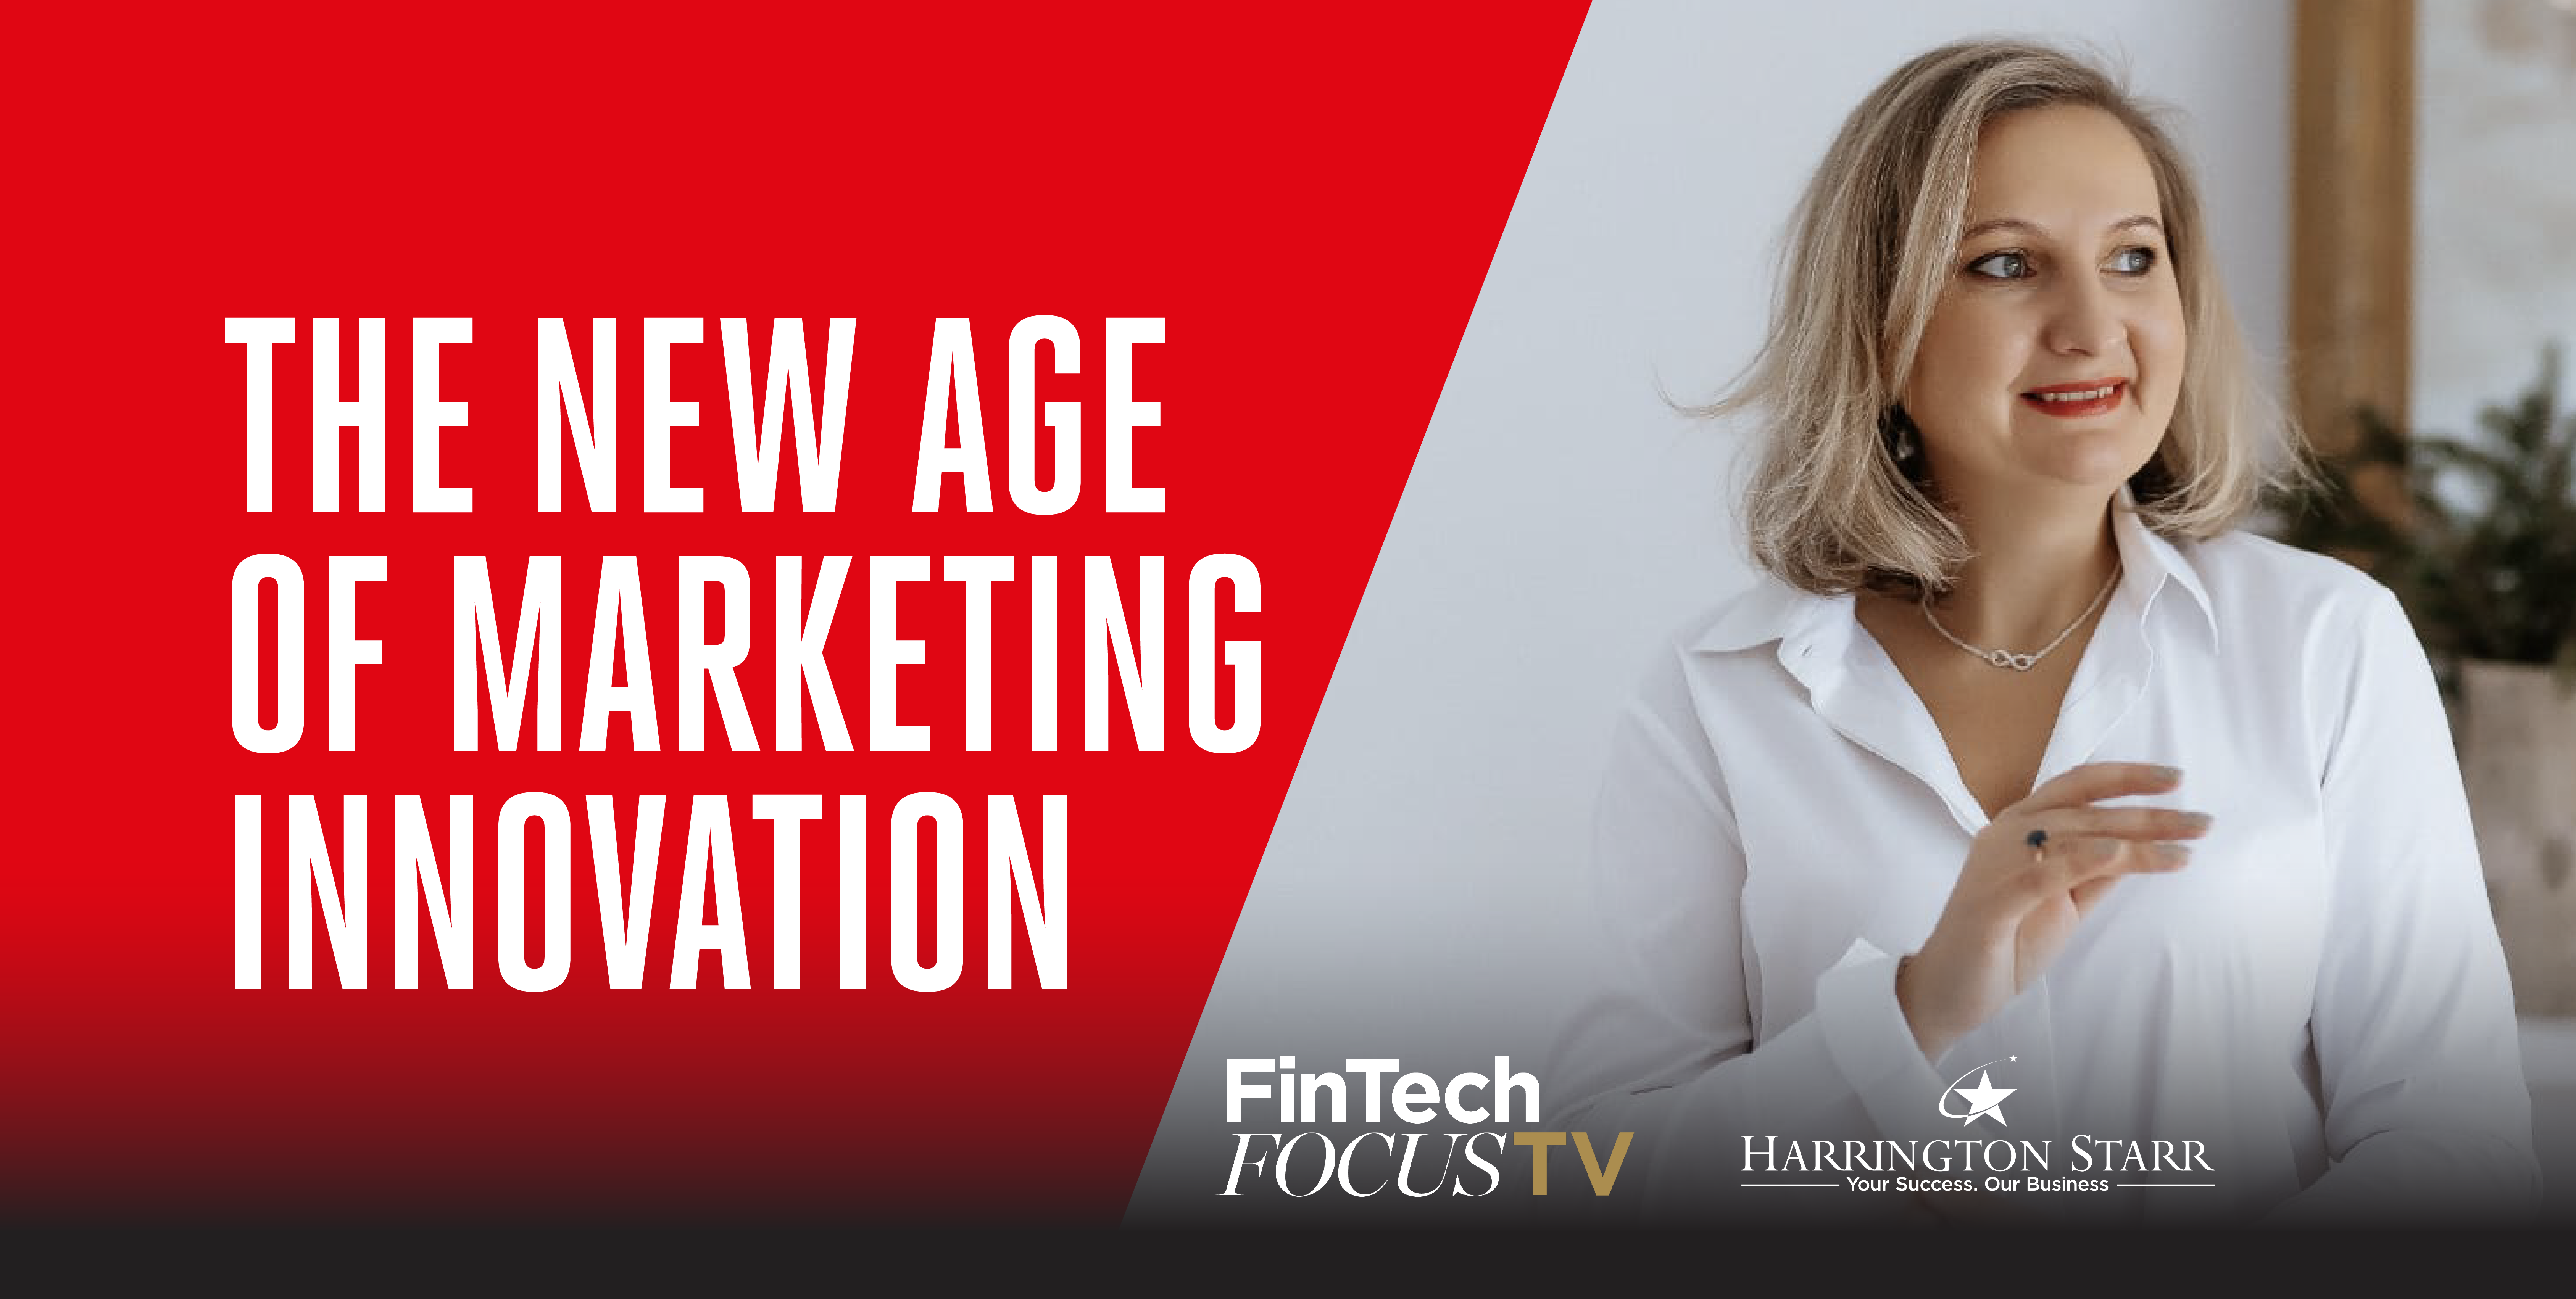 The New Age of Marketing Innovation